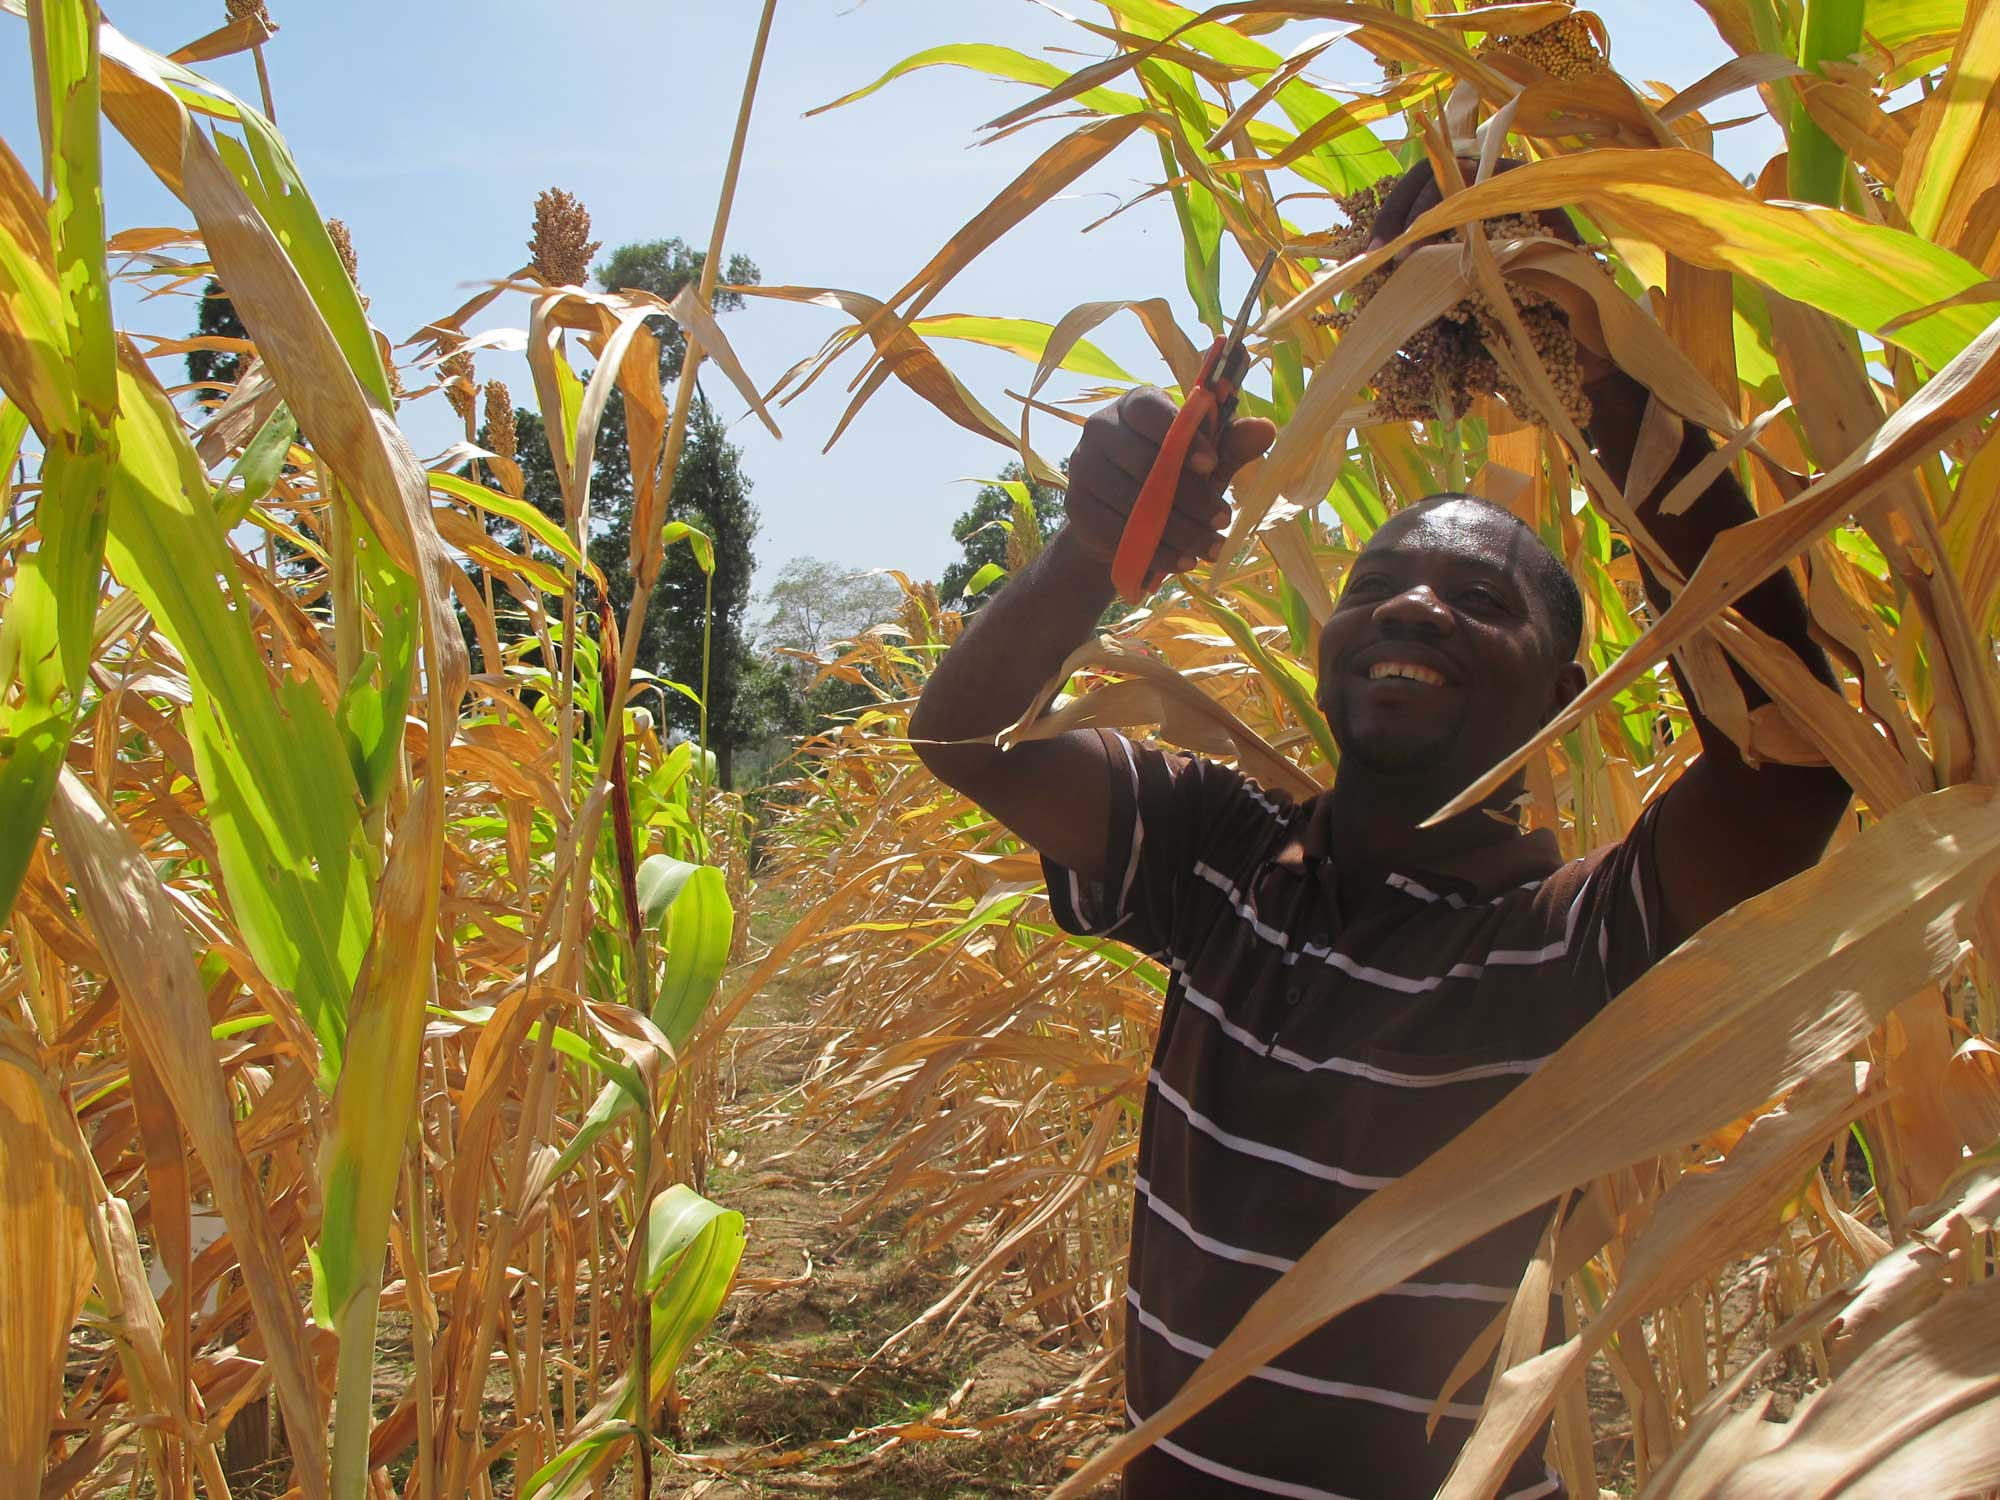 Photograph of a man hand-harvesting sorghum in Haiti. The photo shows a man standing in a field of sorghum and reaching up to cut an ear of sorghum off a plant with a tool.